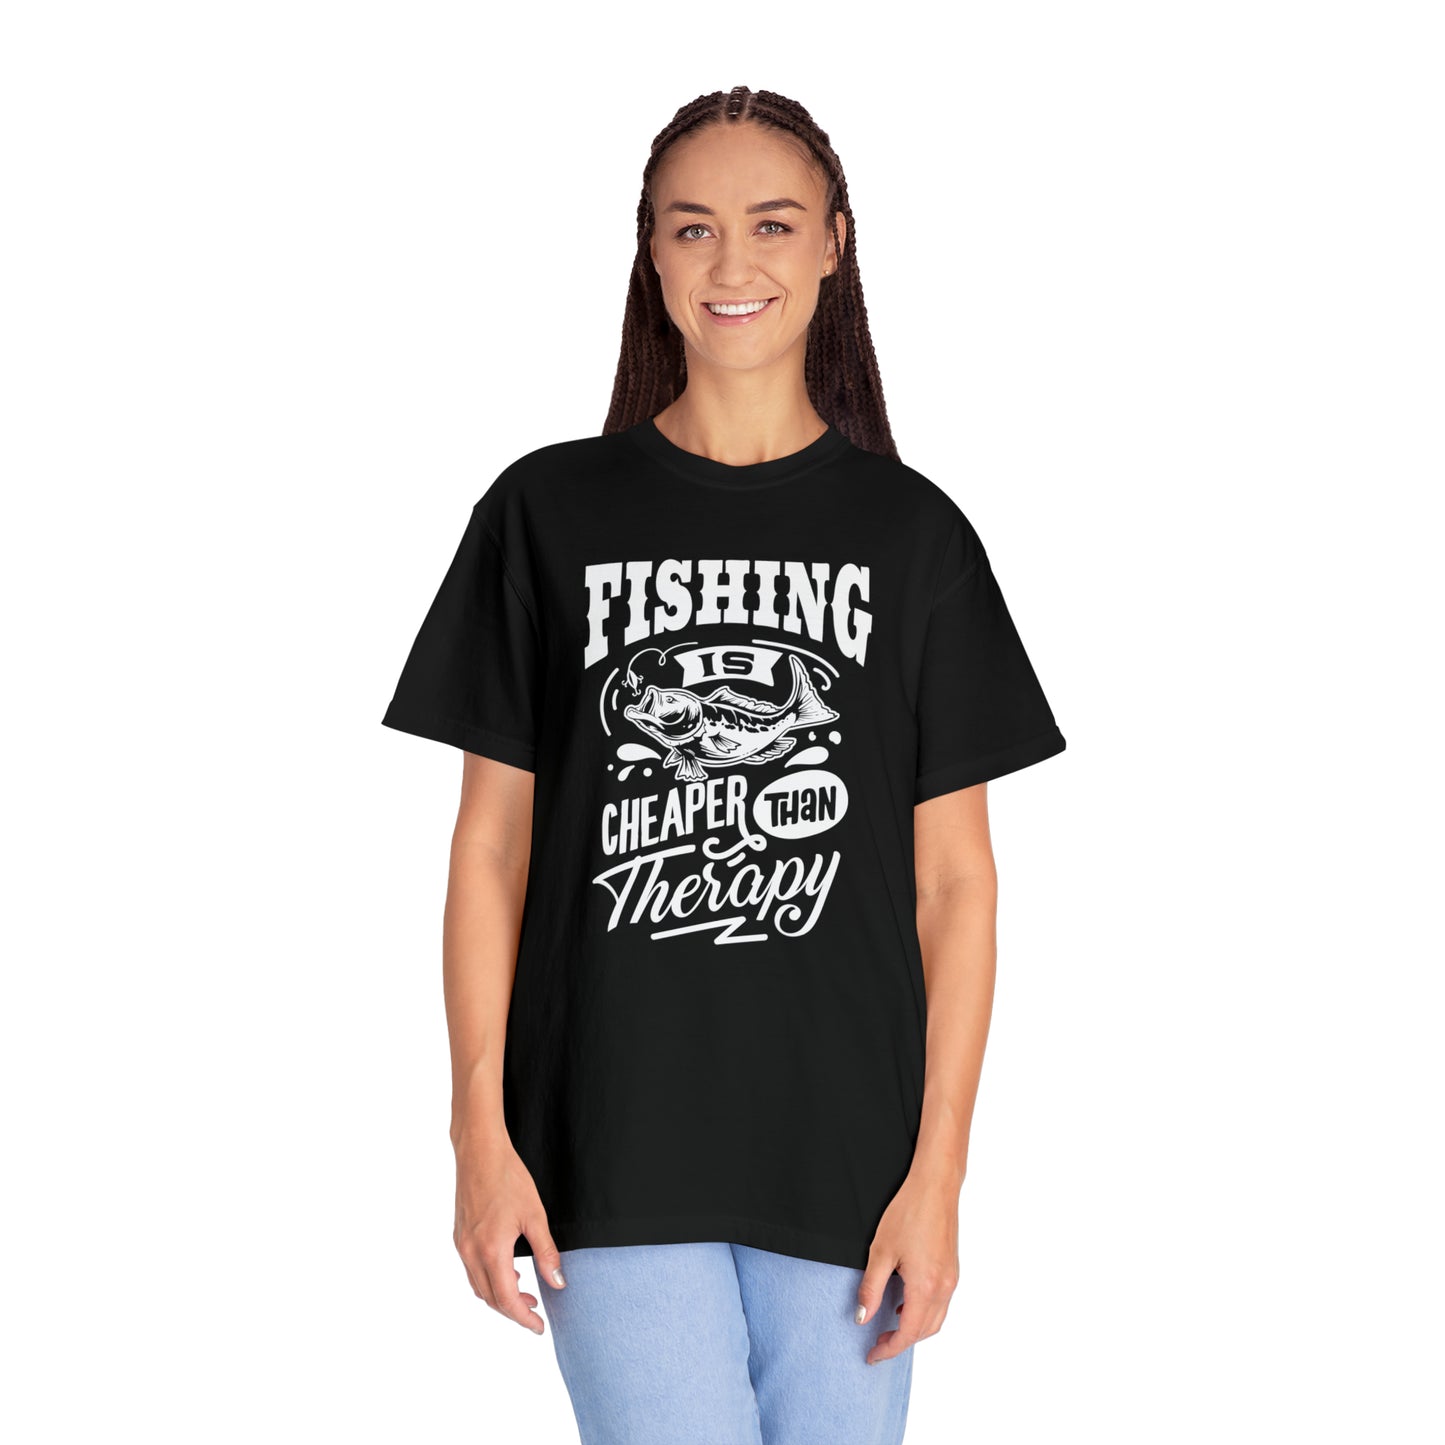 Reel in Tranquility: Fishing Therapy T-Shirt